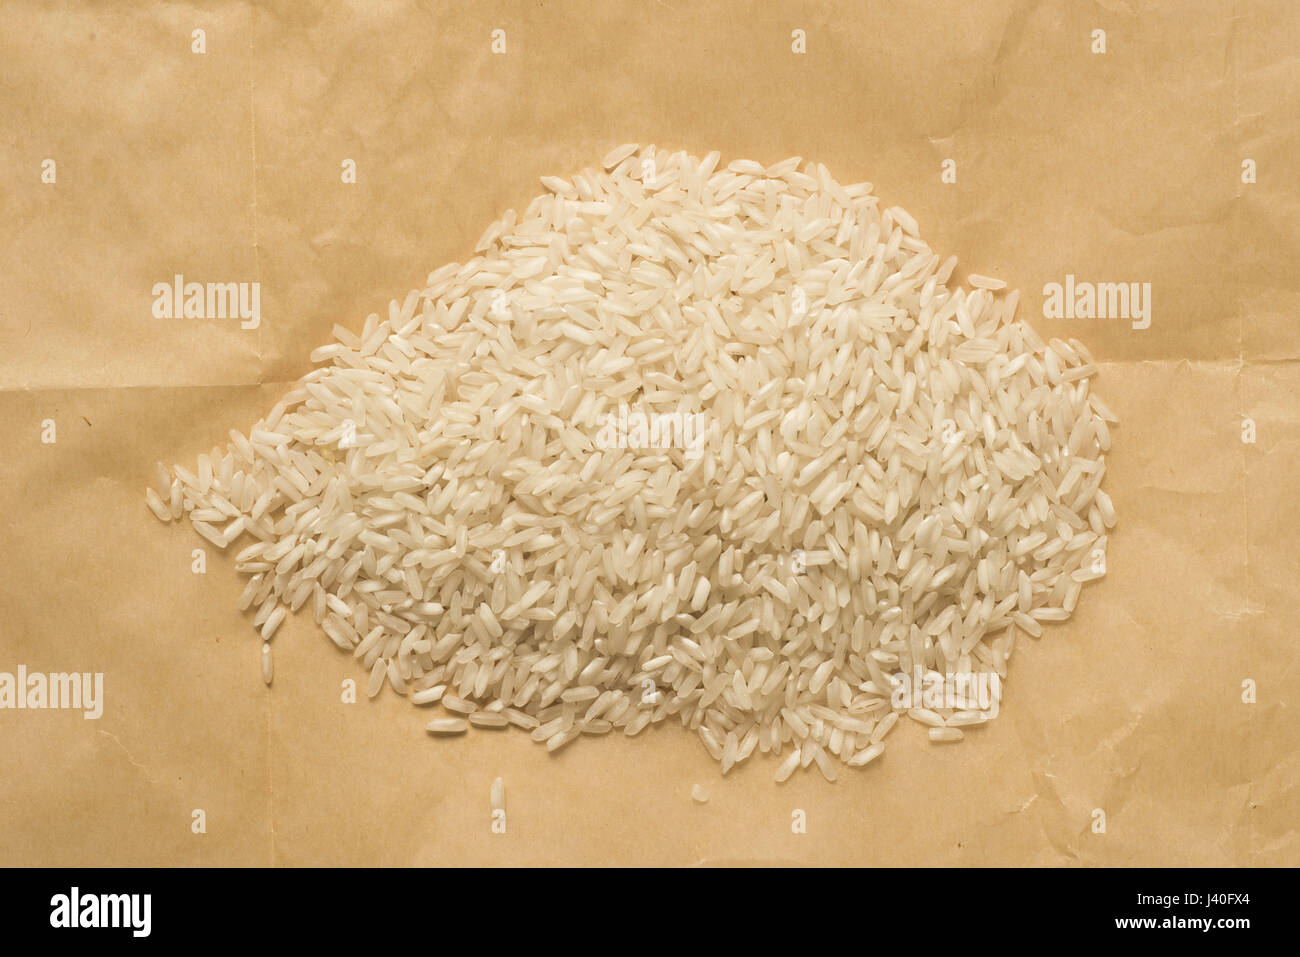 heap of dry raw rice  on brown paper Stock Photo